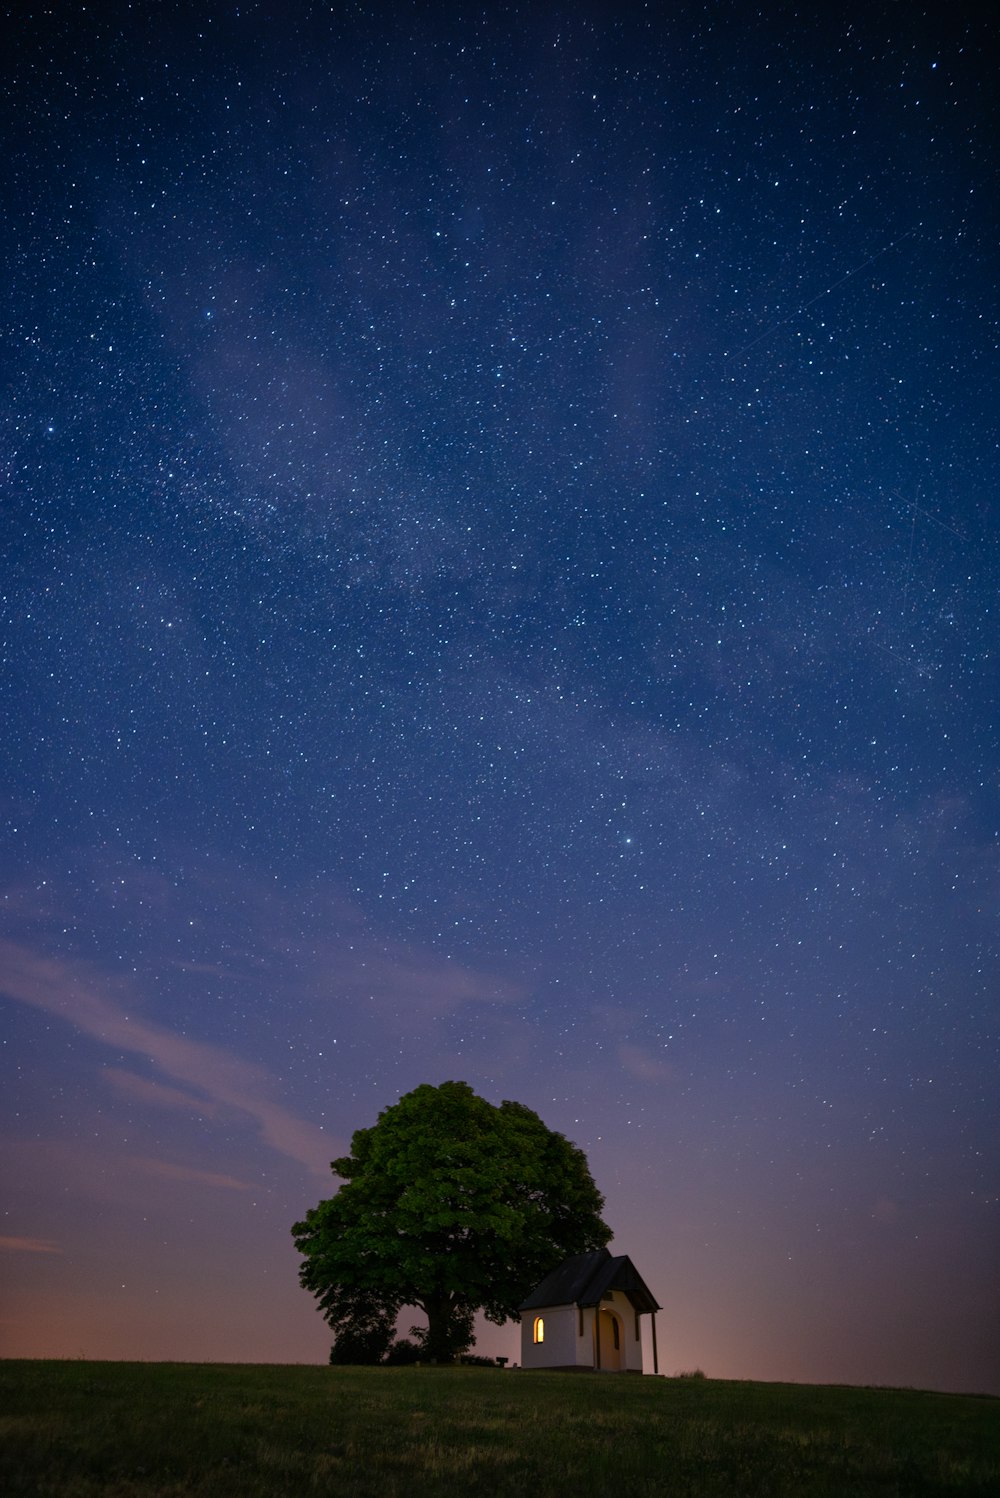 a tree and a house under a night sky